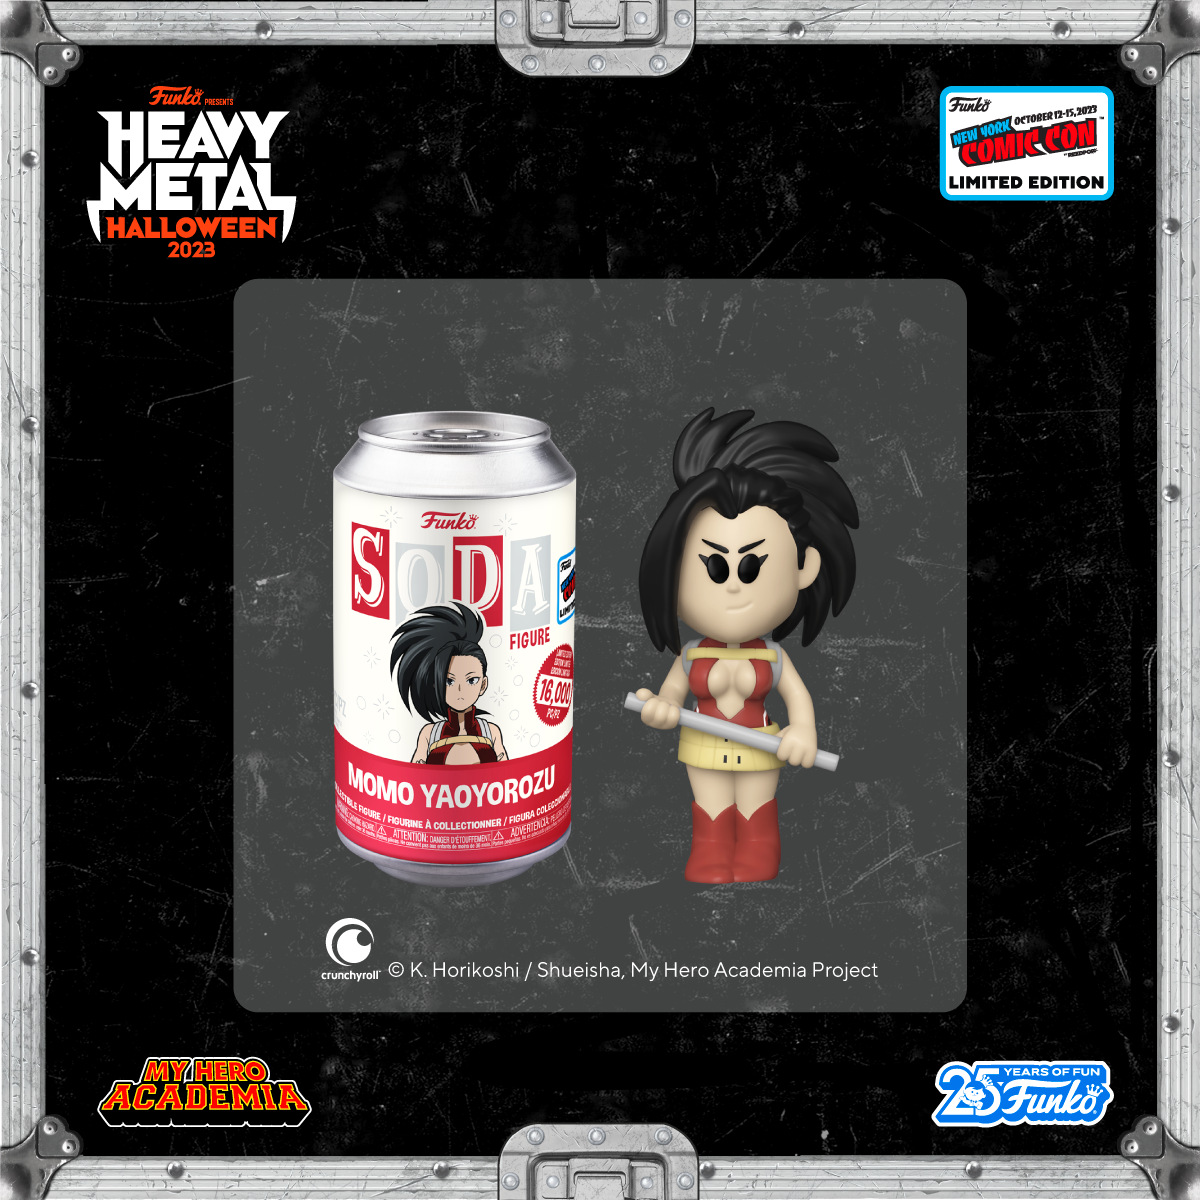 Momo Yaoyorozu is on a quest to become a Pro Hero as she takes the form of this New York Comic Con exclusive Funko SODA figure.